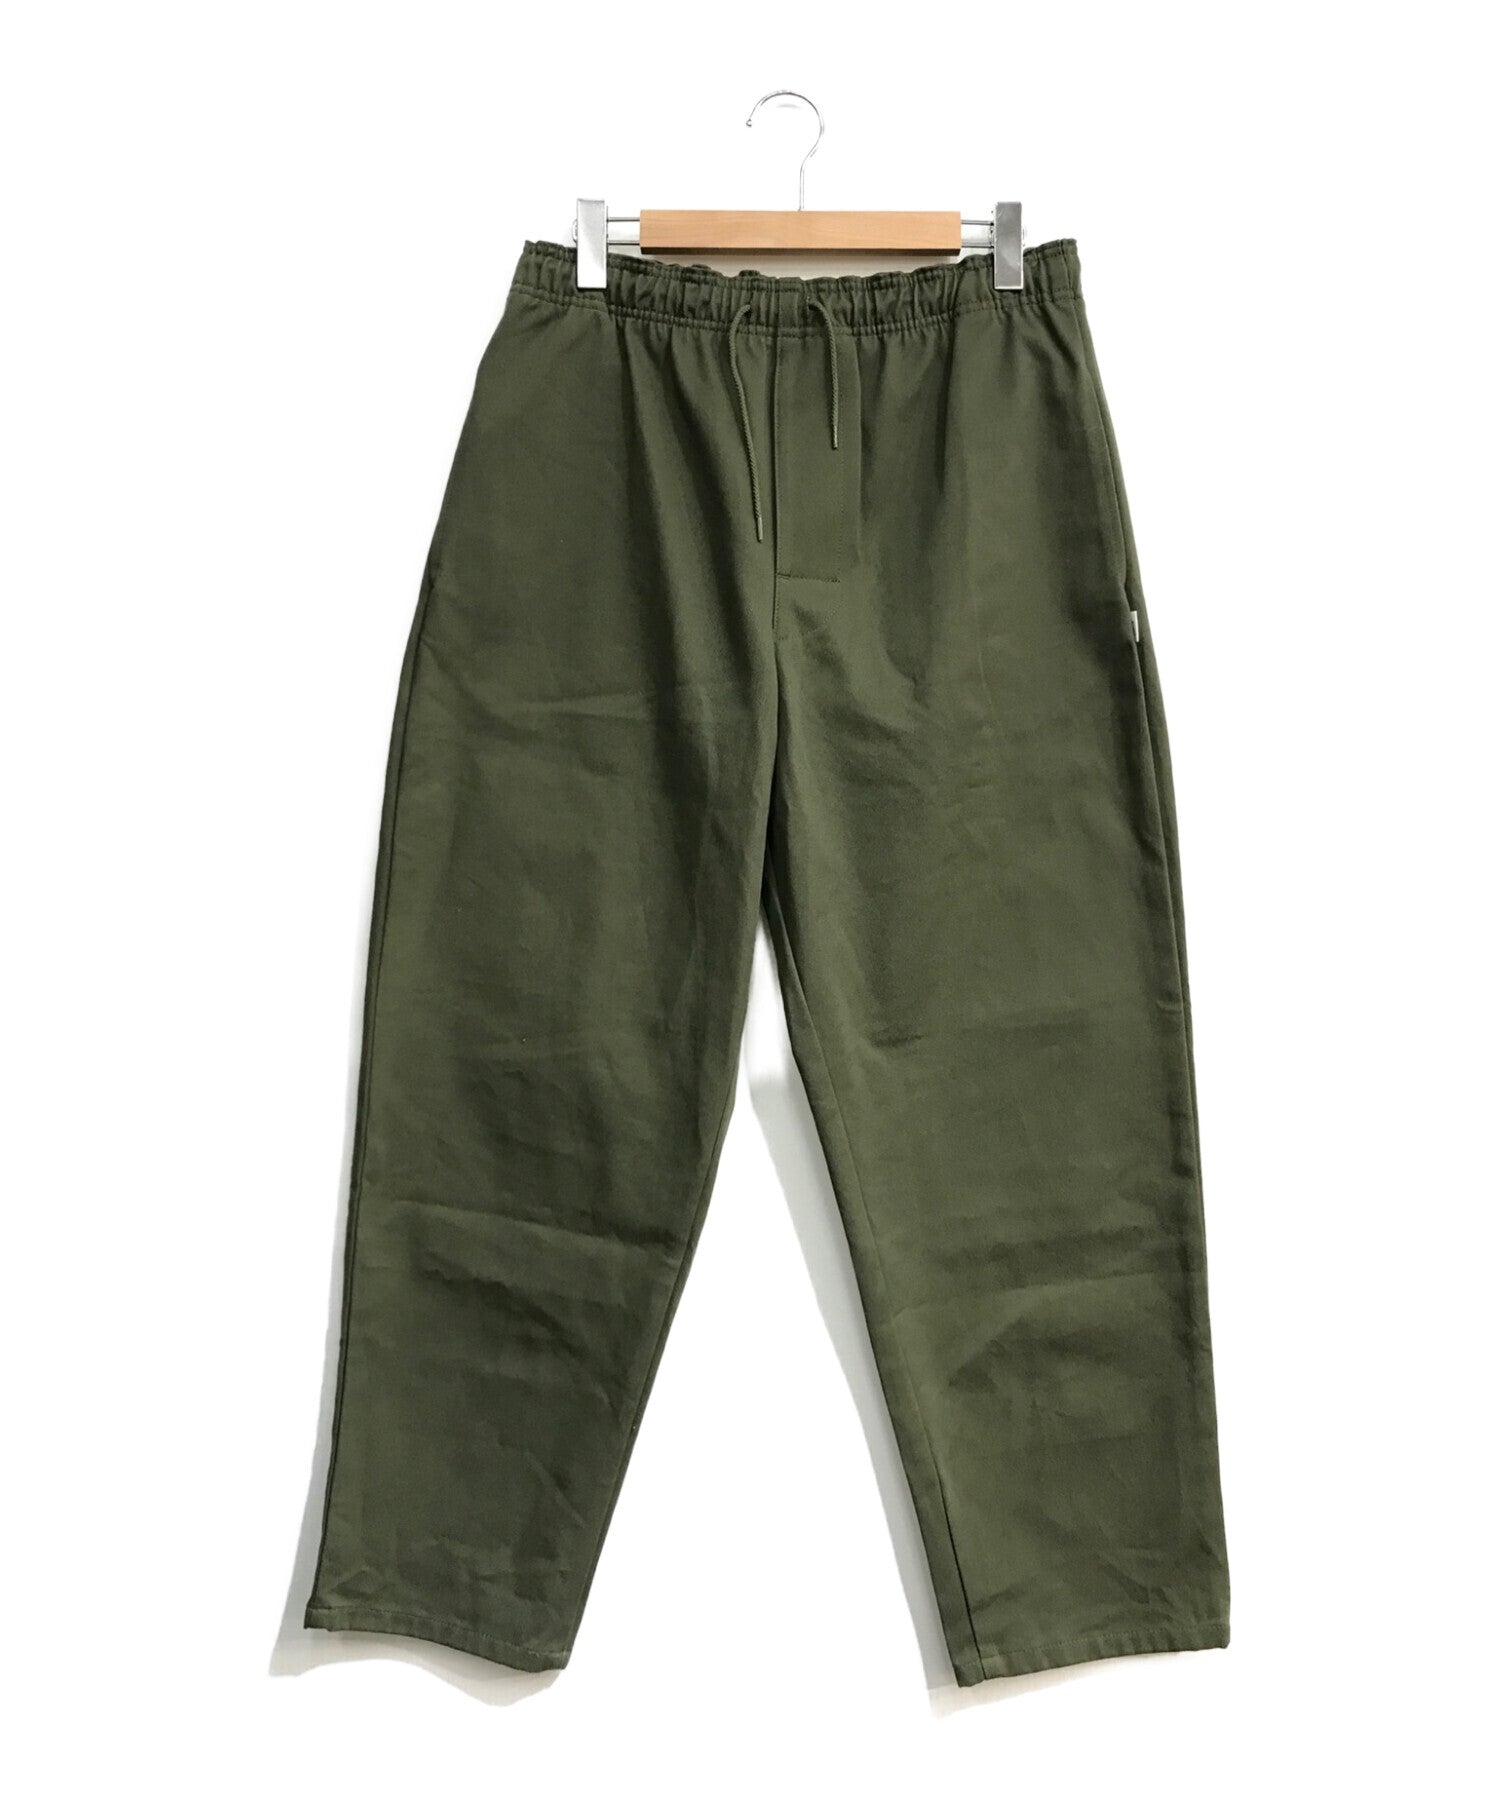 WTAPS SEAGULL 03 TROUSERS NYCO RIPSTOPメンズ - www.paramountbb.com.au